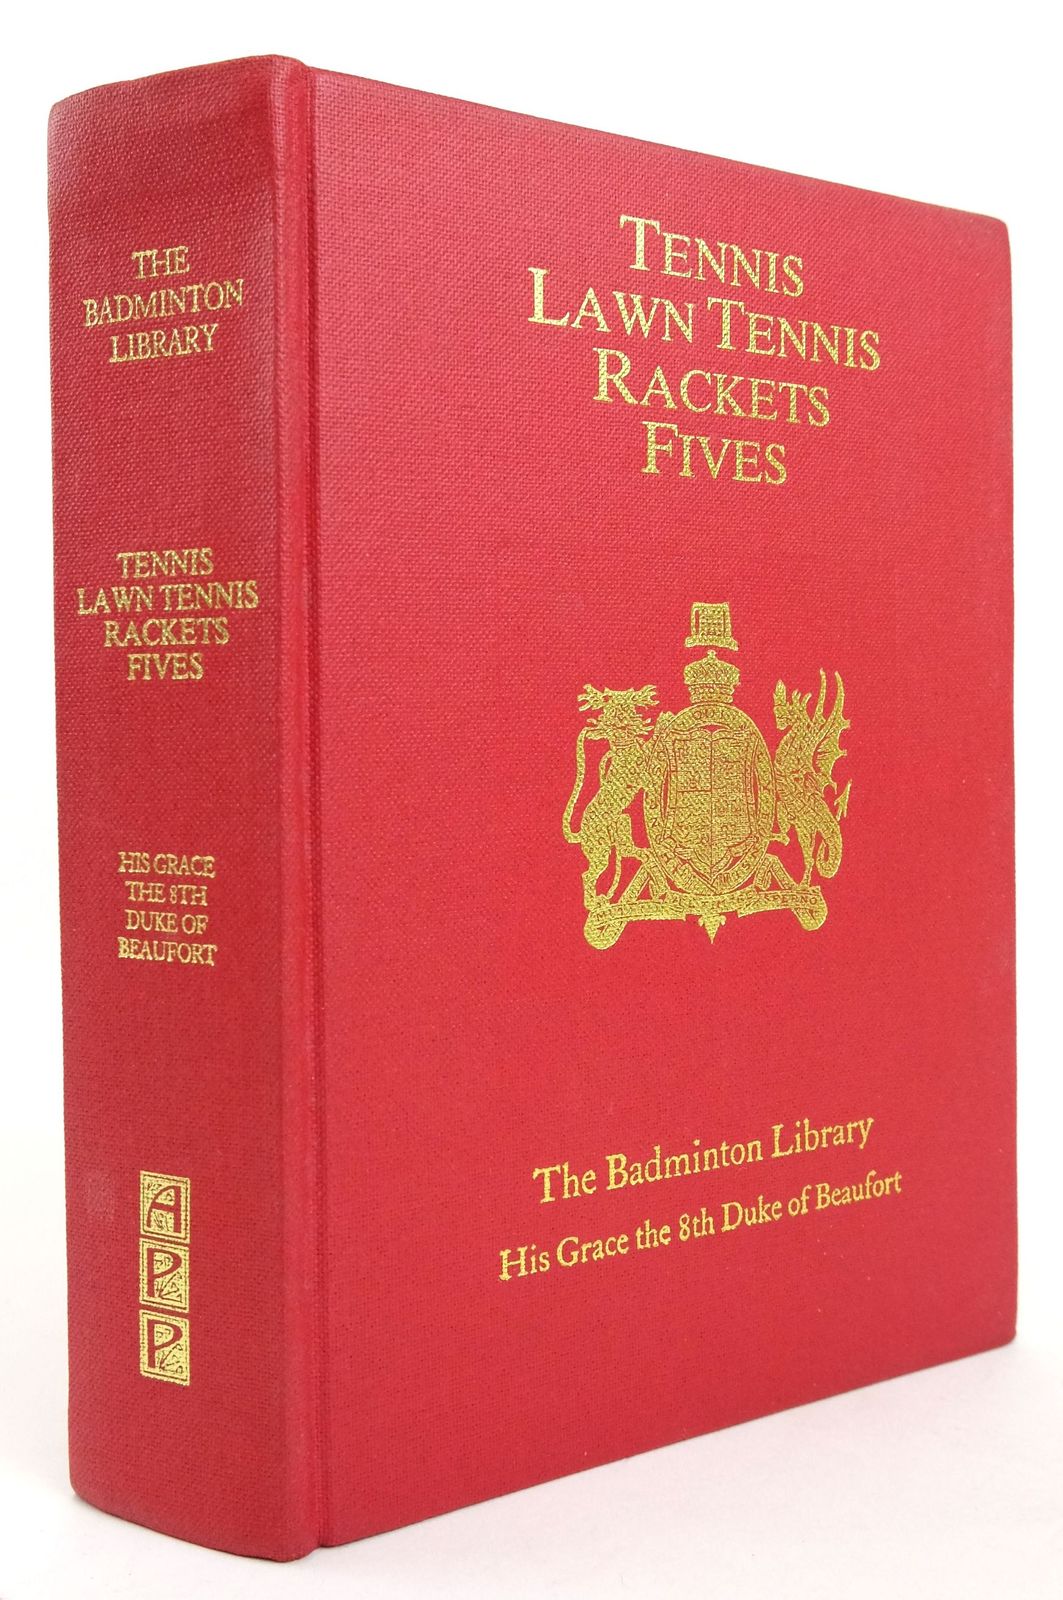 Photo of THE BADMINTON LIBRARY OF SPORTS AND PASTIMES - TENNIS: LAWN TENNIS, RACKETS: FIVES written by Heathcote, J.M
Bouverie, E.O.P
Ainger, A.C. published by Ashford Press Publishing (STOCK CODE: 1820172)  for sale by Stella & Rose's Books